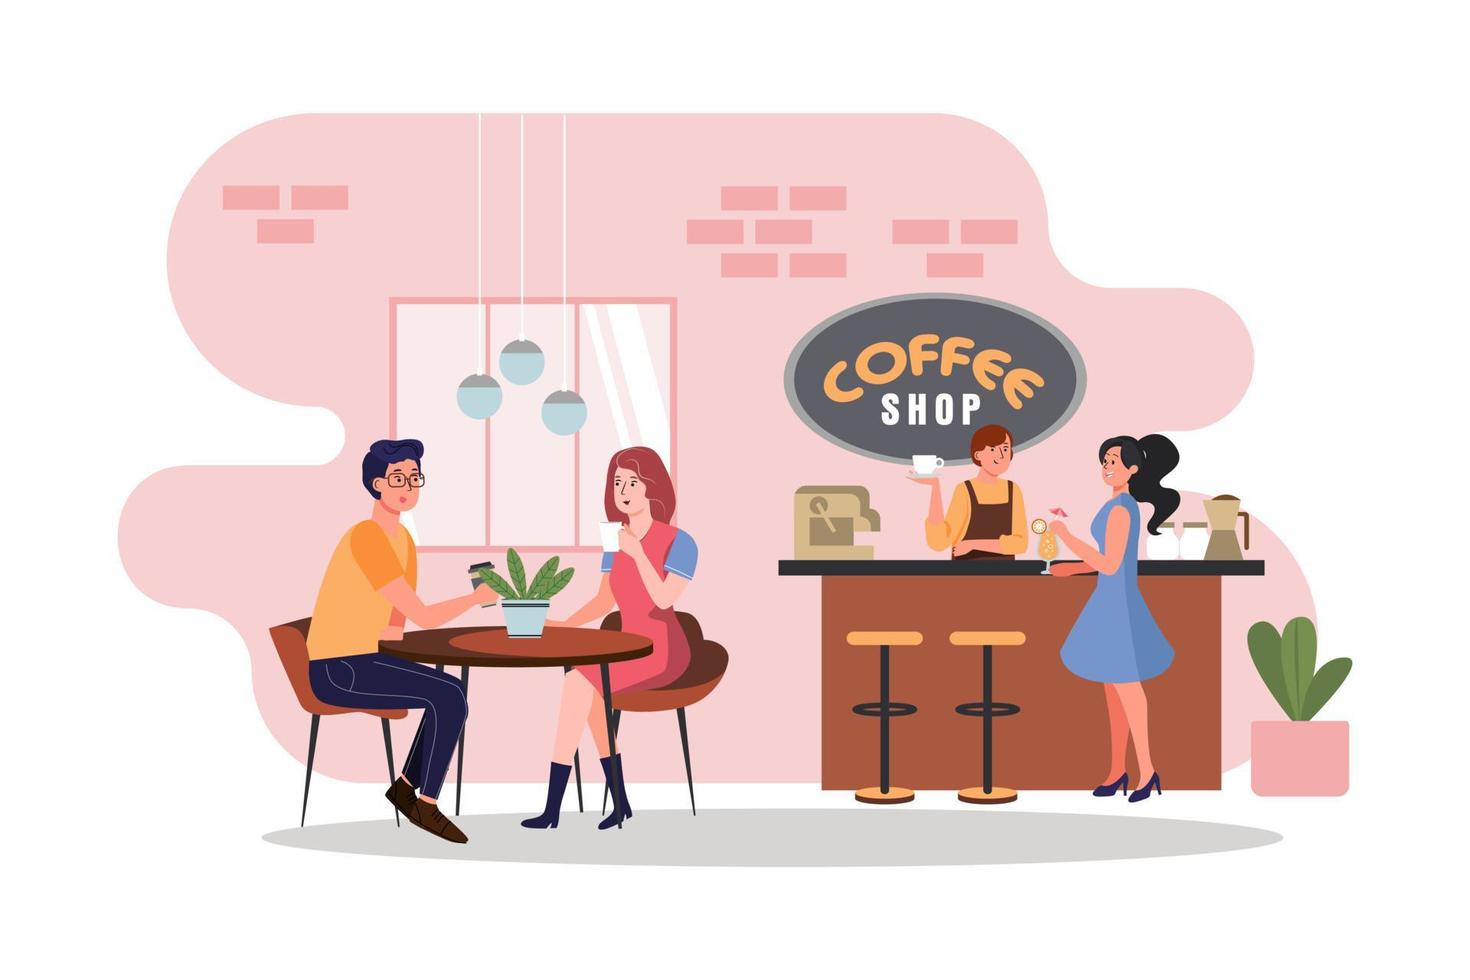 Coffee shop or cafe with people sitting at tables, drinking coffee, and working on laptops and barista standing at the counter. vector